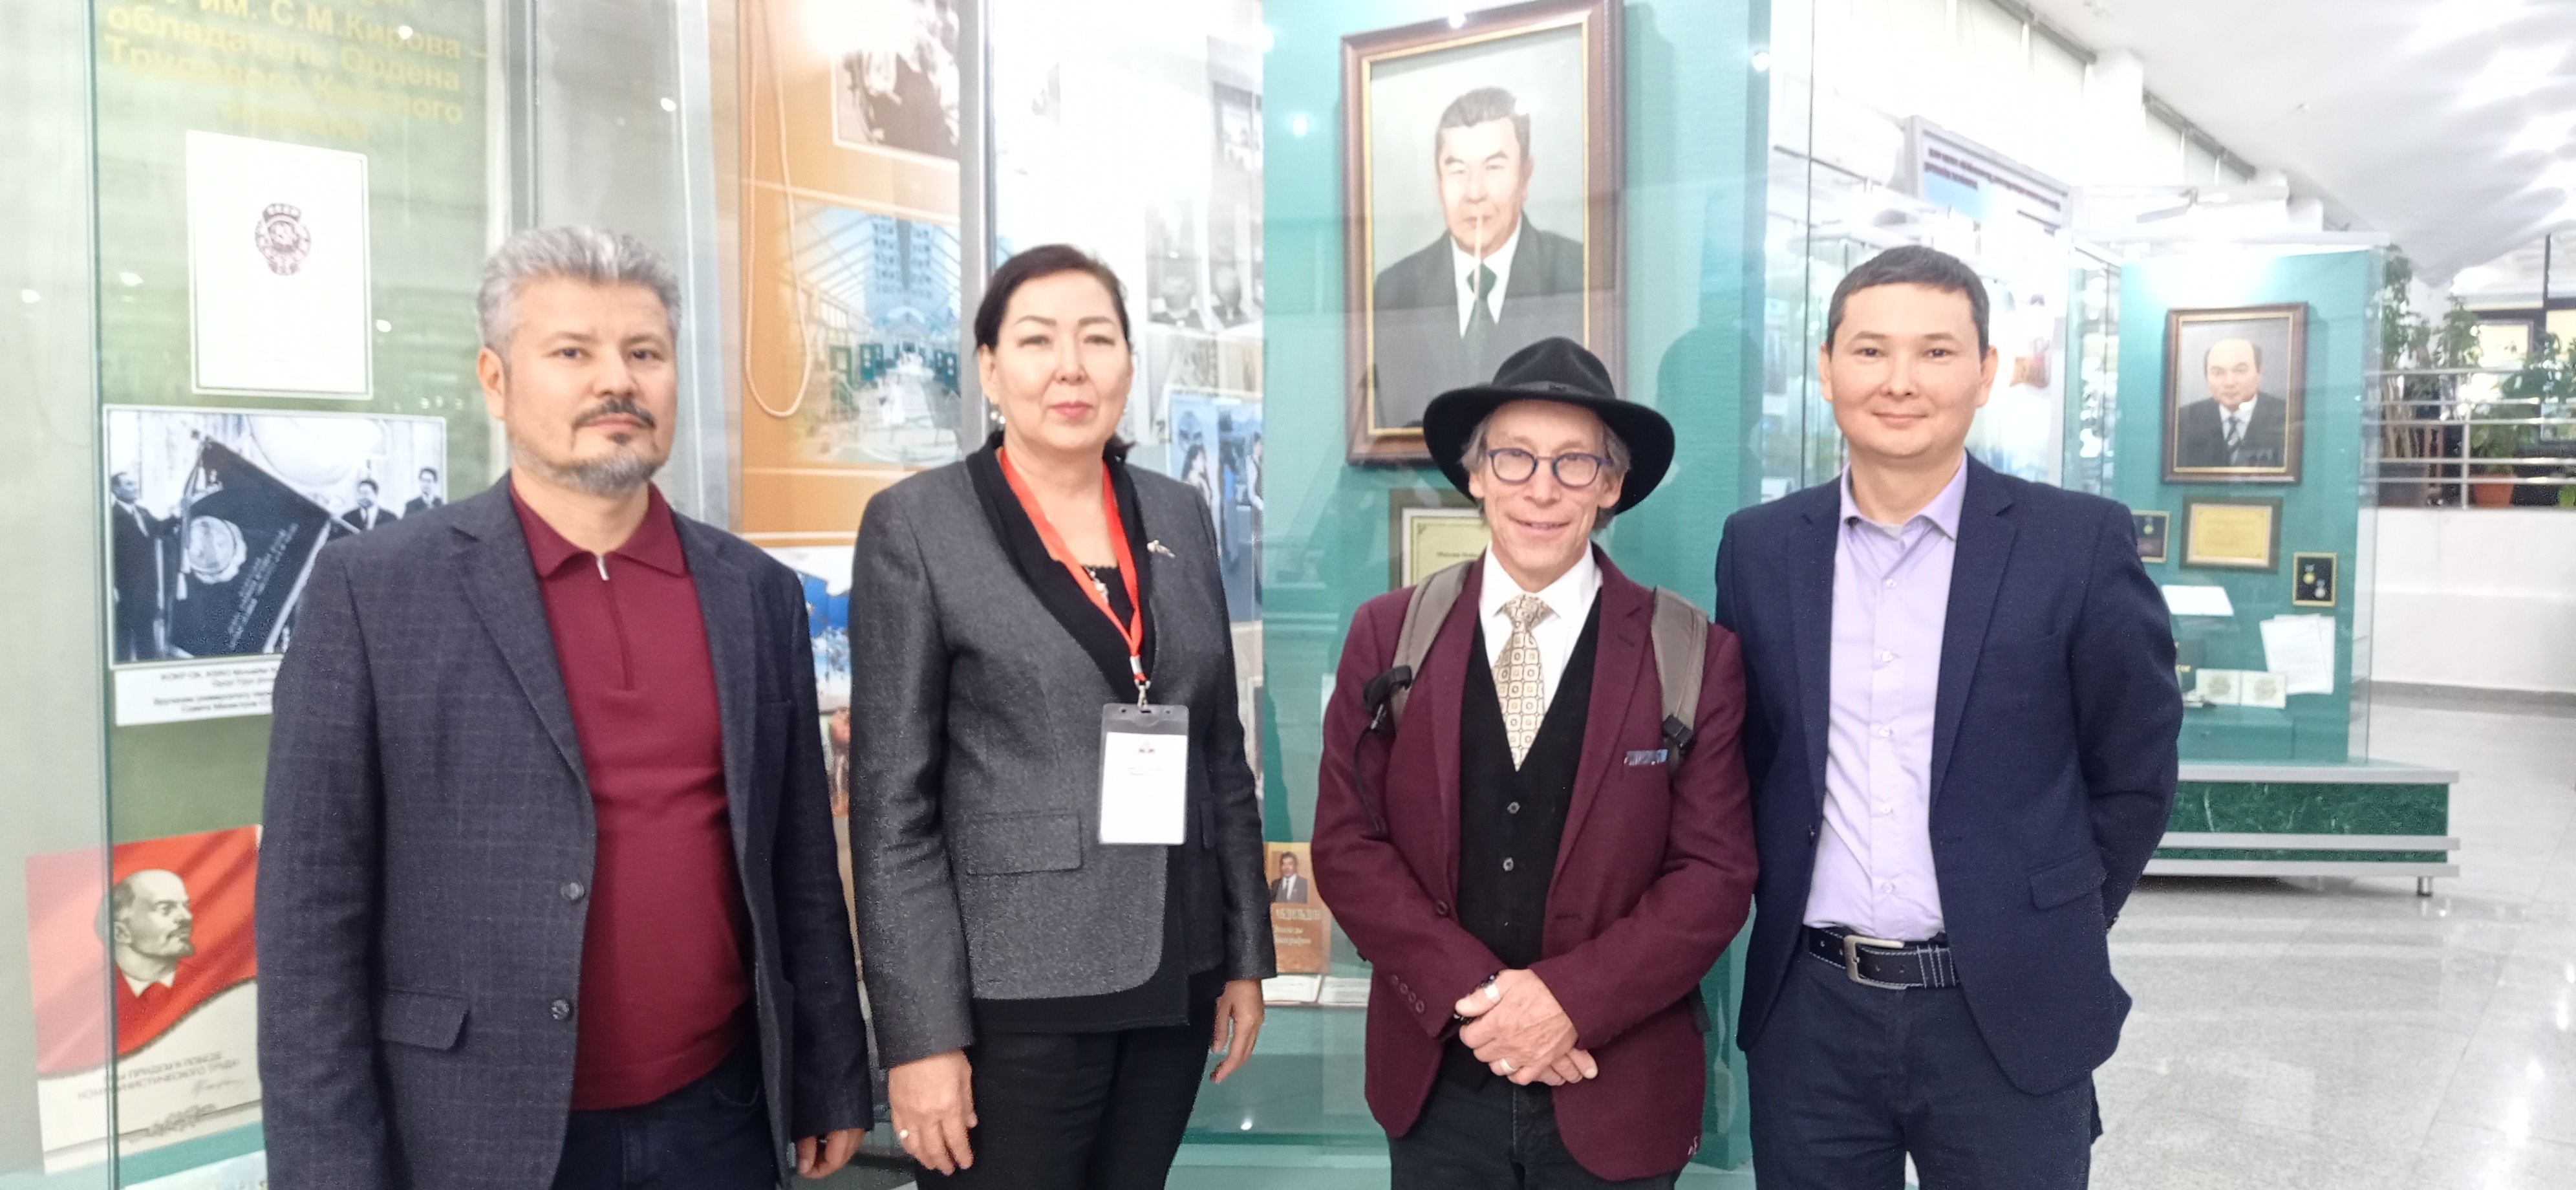 Professor Lawrence Maxwell Krauss, Founder of the Department of Earth and Space Studies at Arizona State University and Director Emeritus of the Origins Project, gave a leadership lecture at the Al-Farabi Kazakh National University